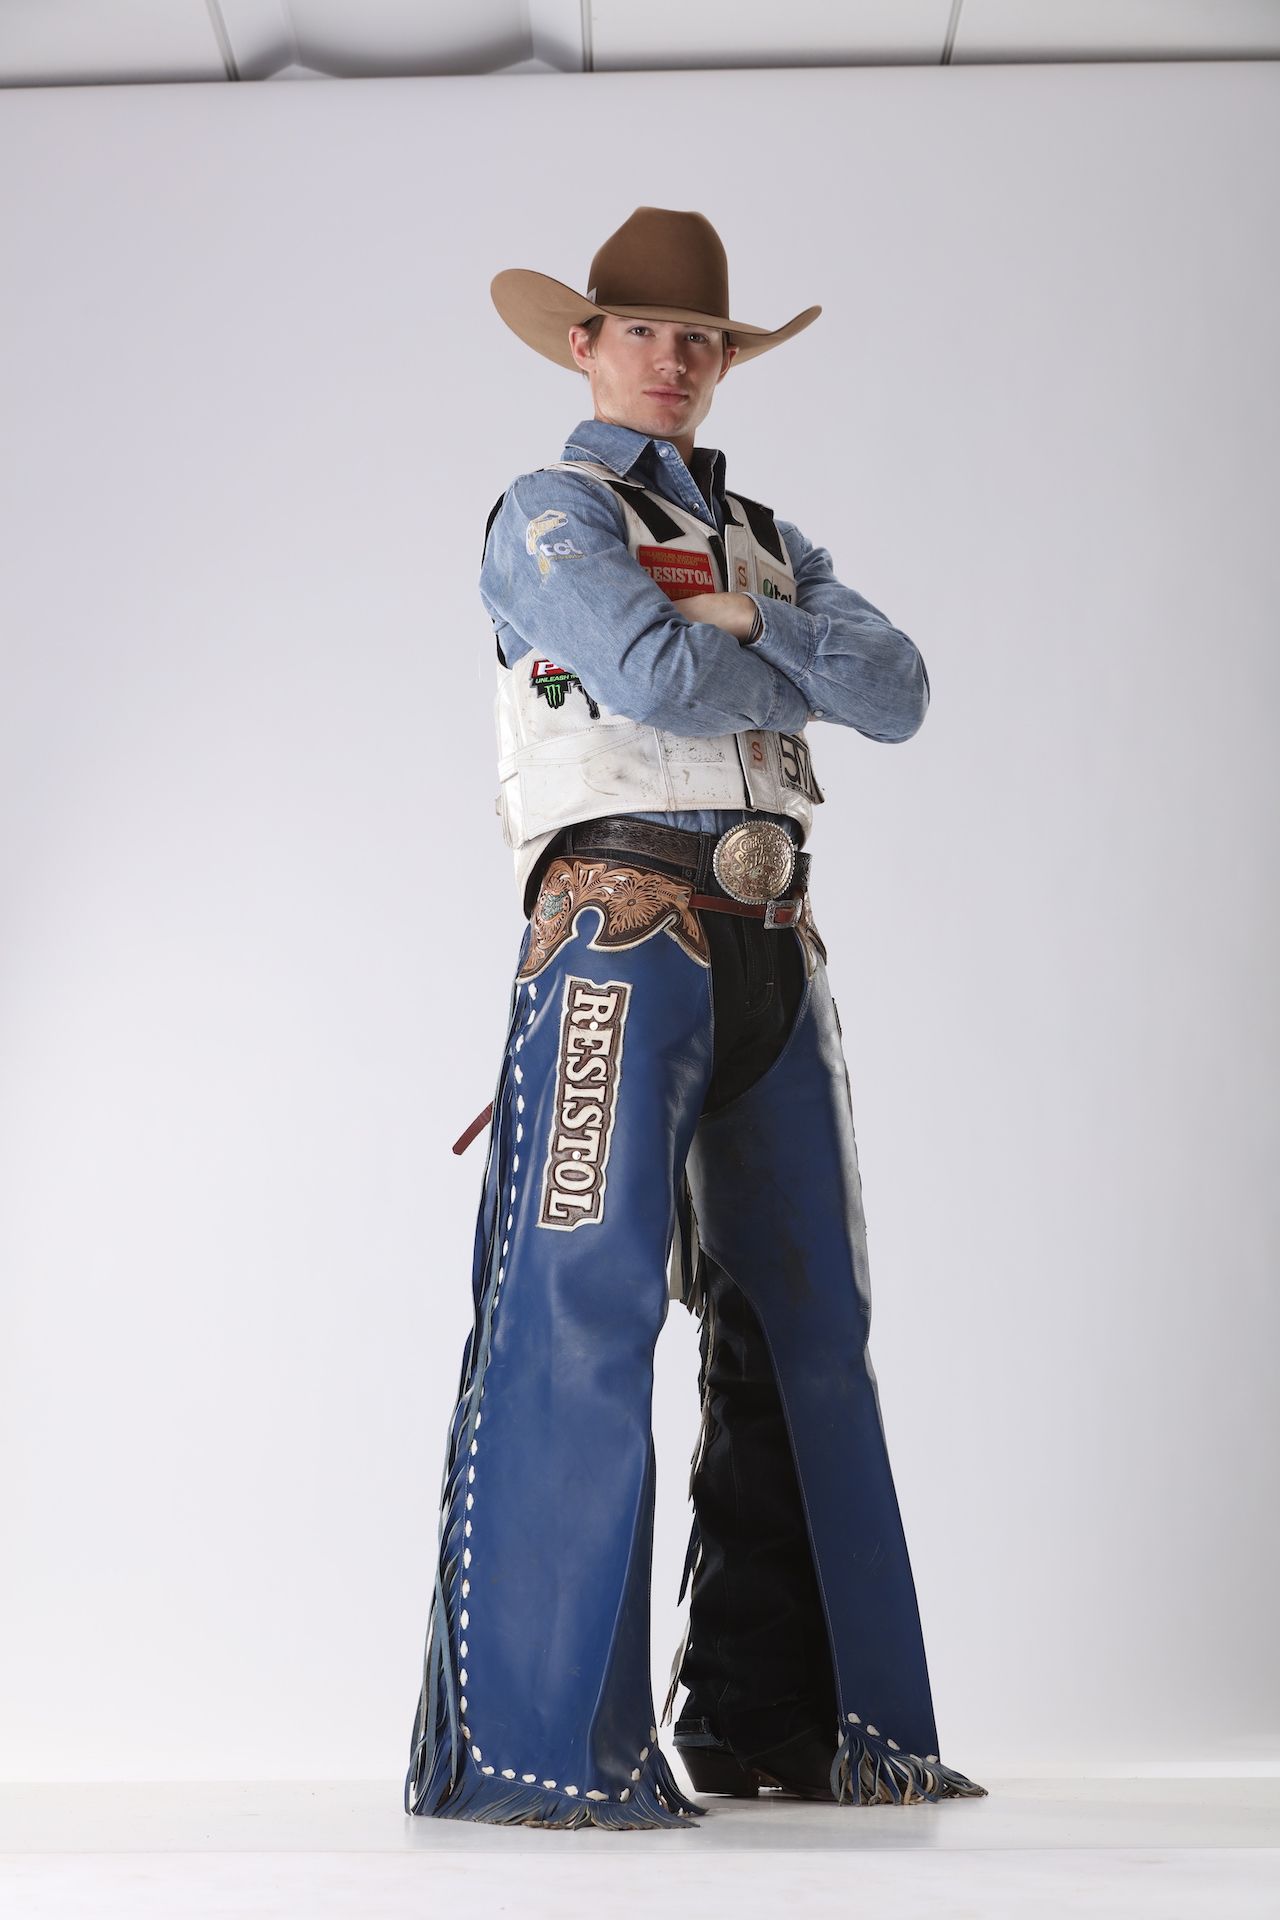 3 Ariat PBR Bull Riders Share Their Workout and Training Tips